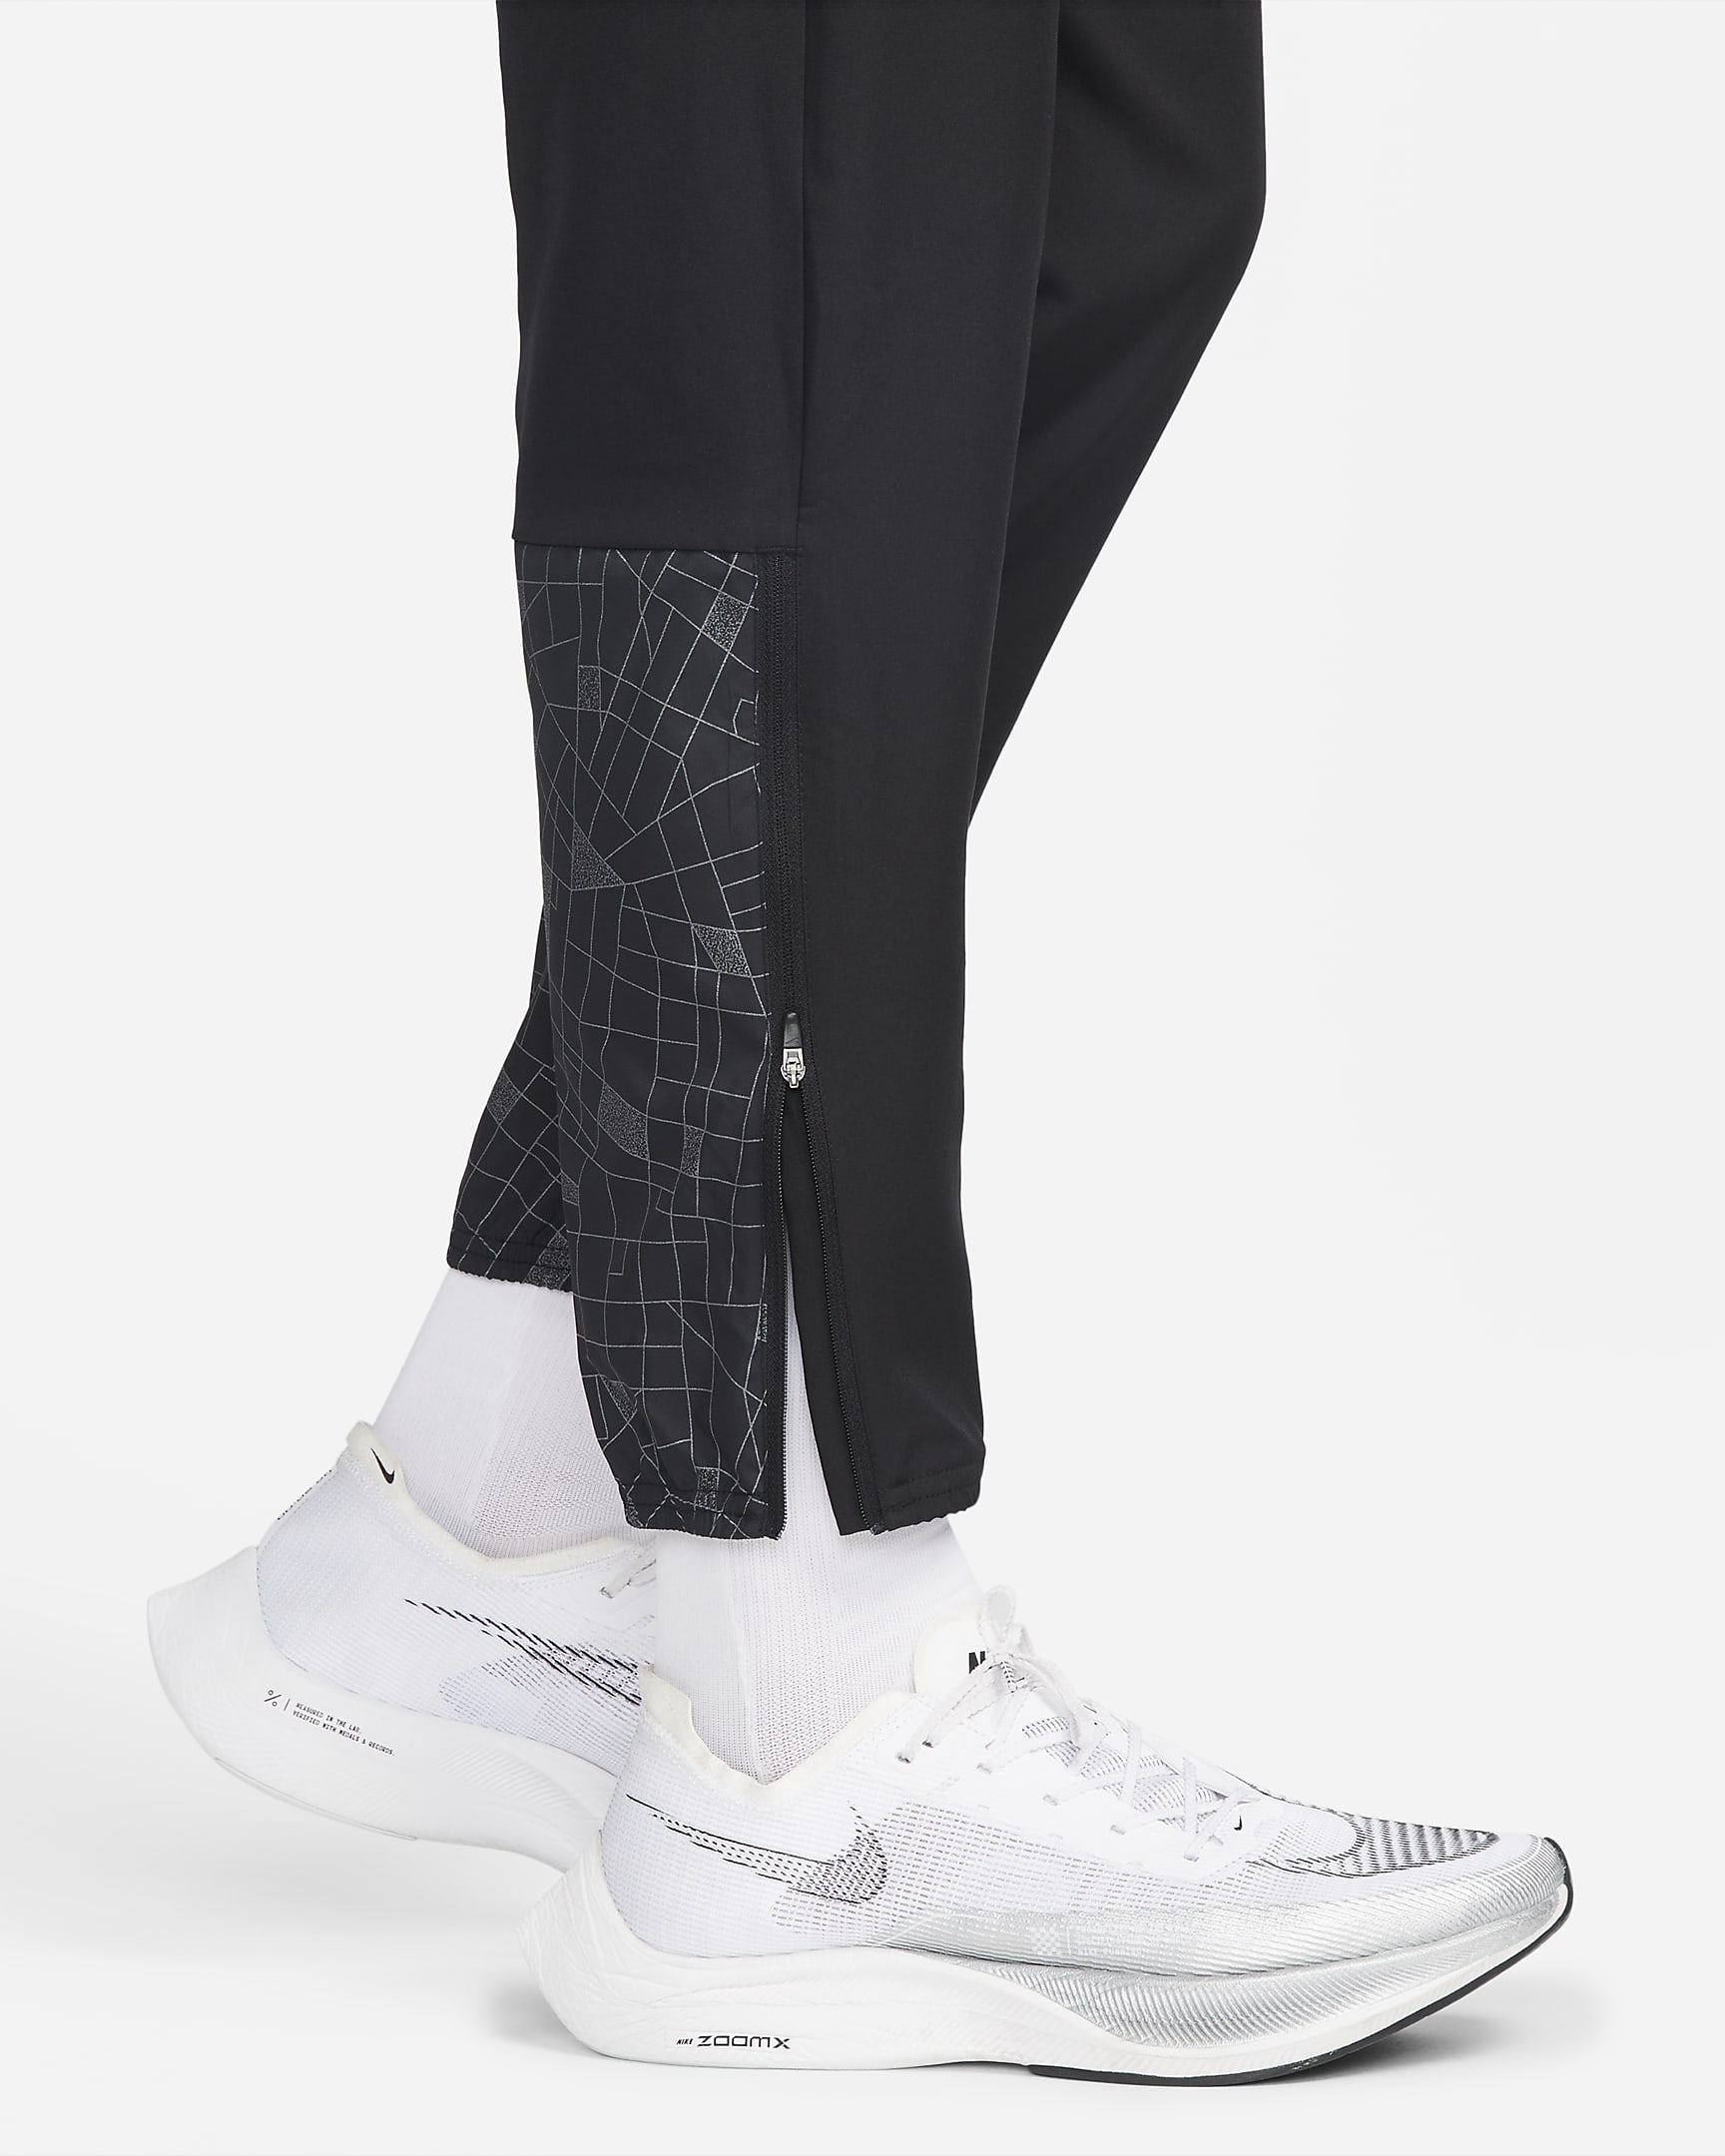 Nike Dri-FIT Run Division Challenger Men's Woven Flash Running Trousers ...